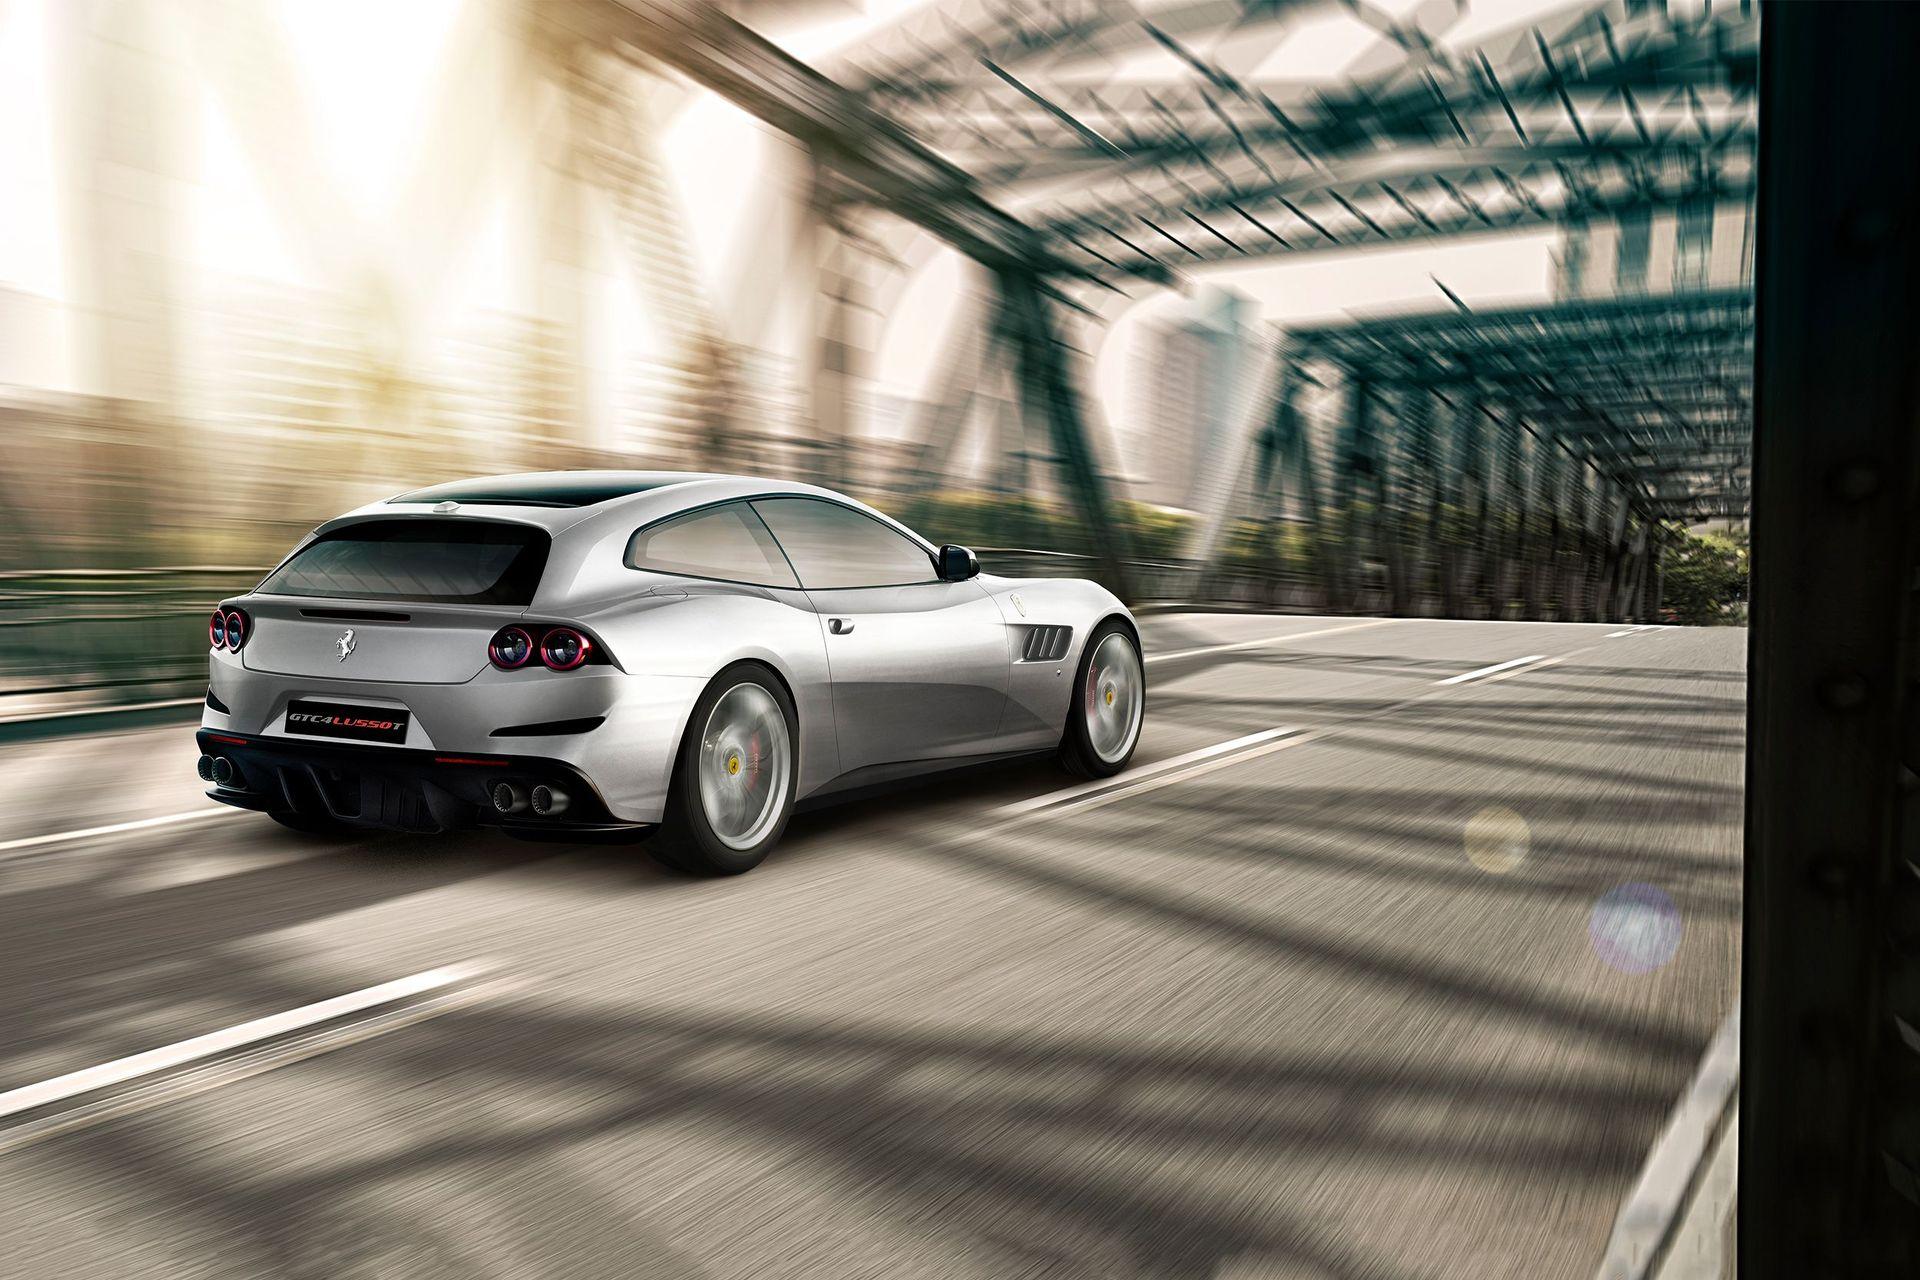 GTC4Lusso T quote.jpg